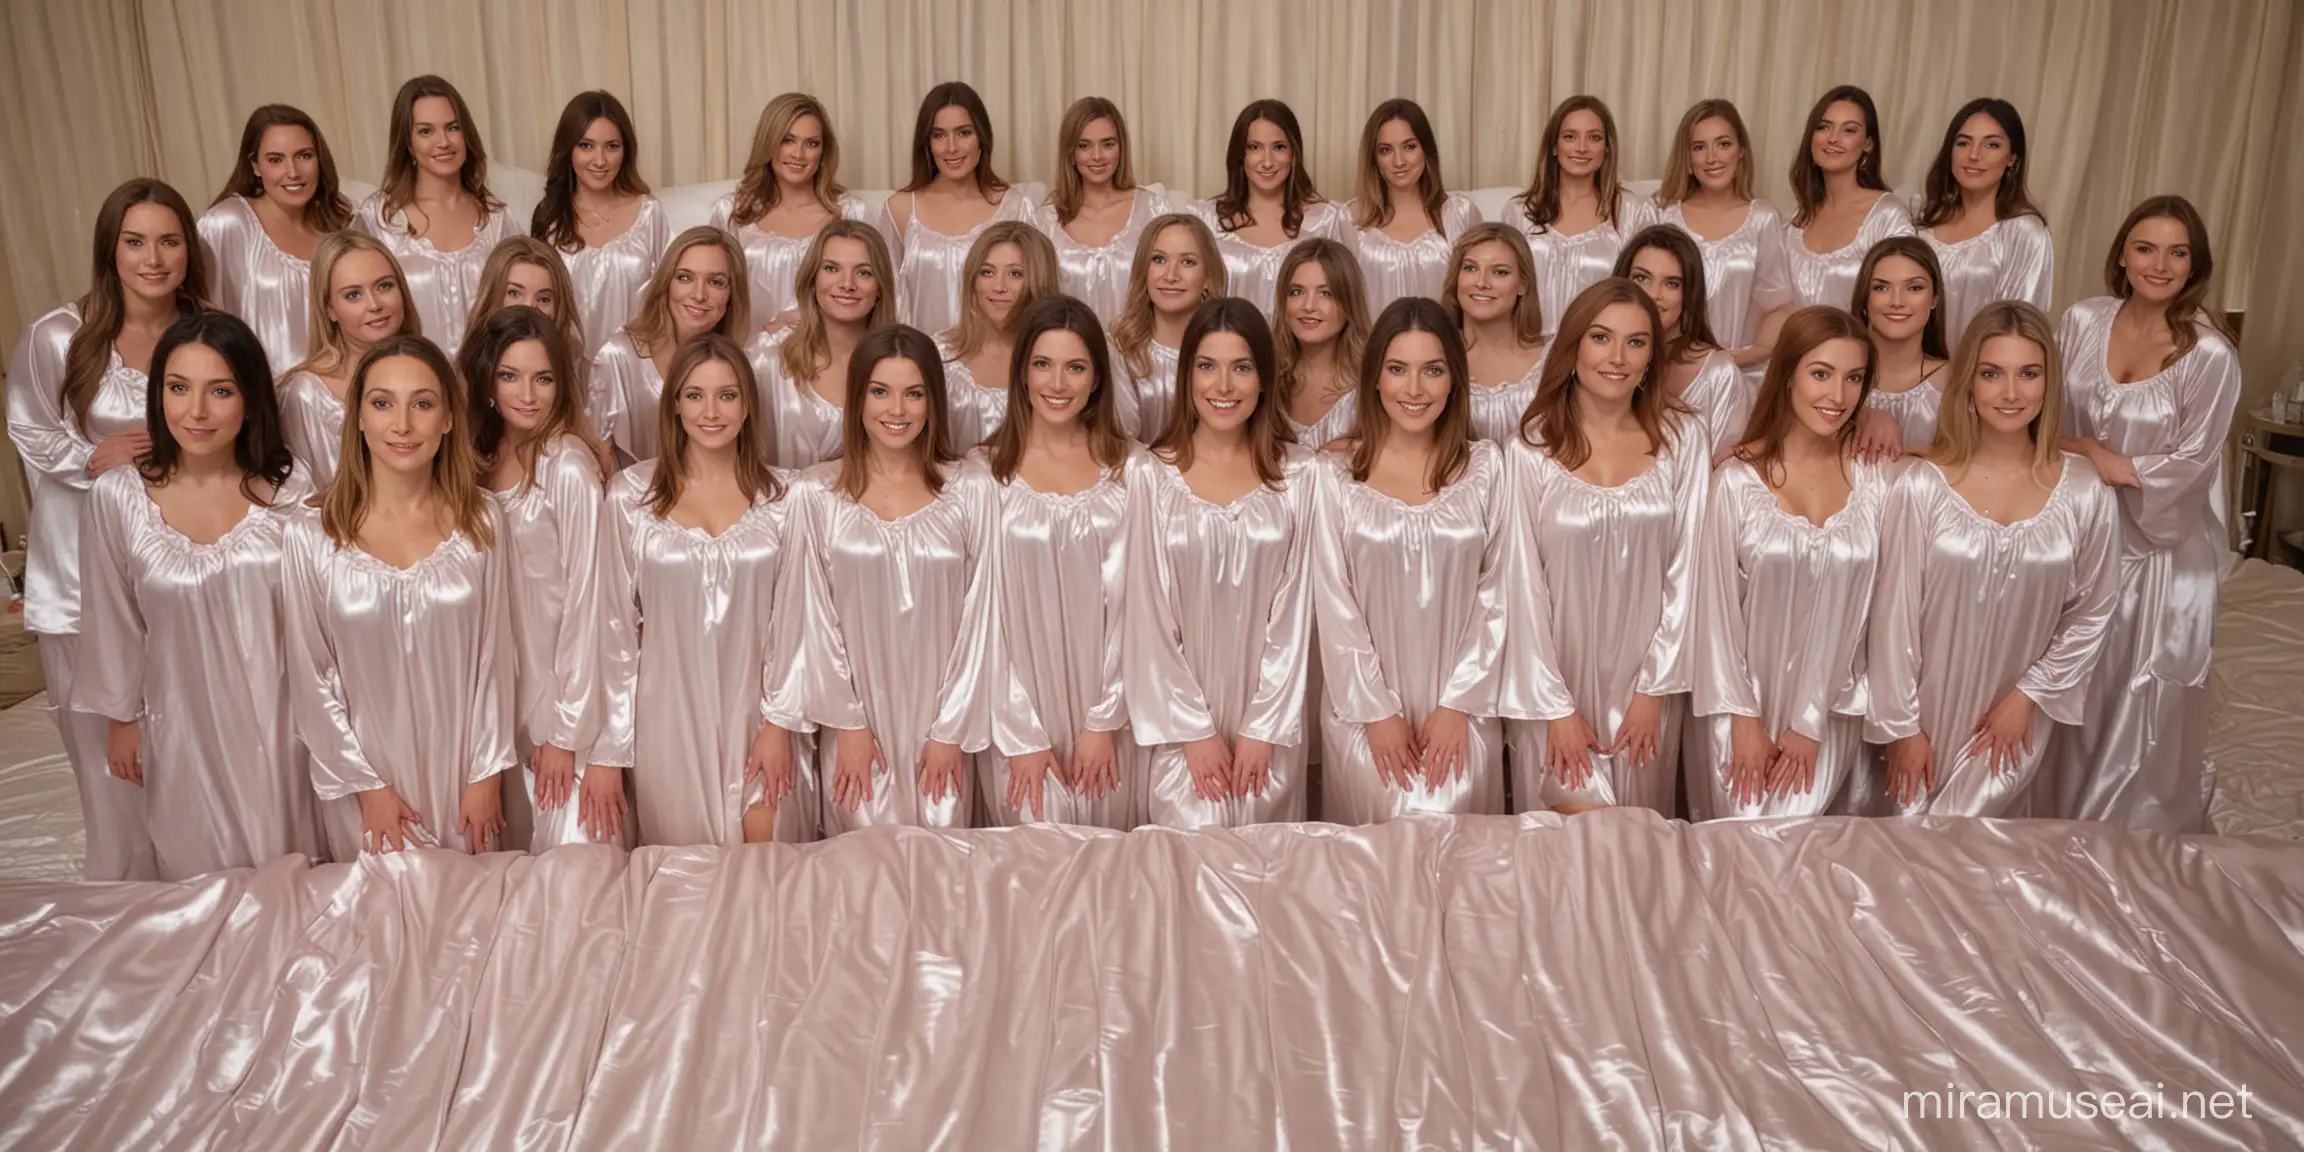 Ethereal Gathering of Women in Milky Satin Nightgowns on Giant Bed